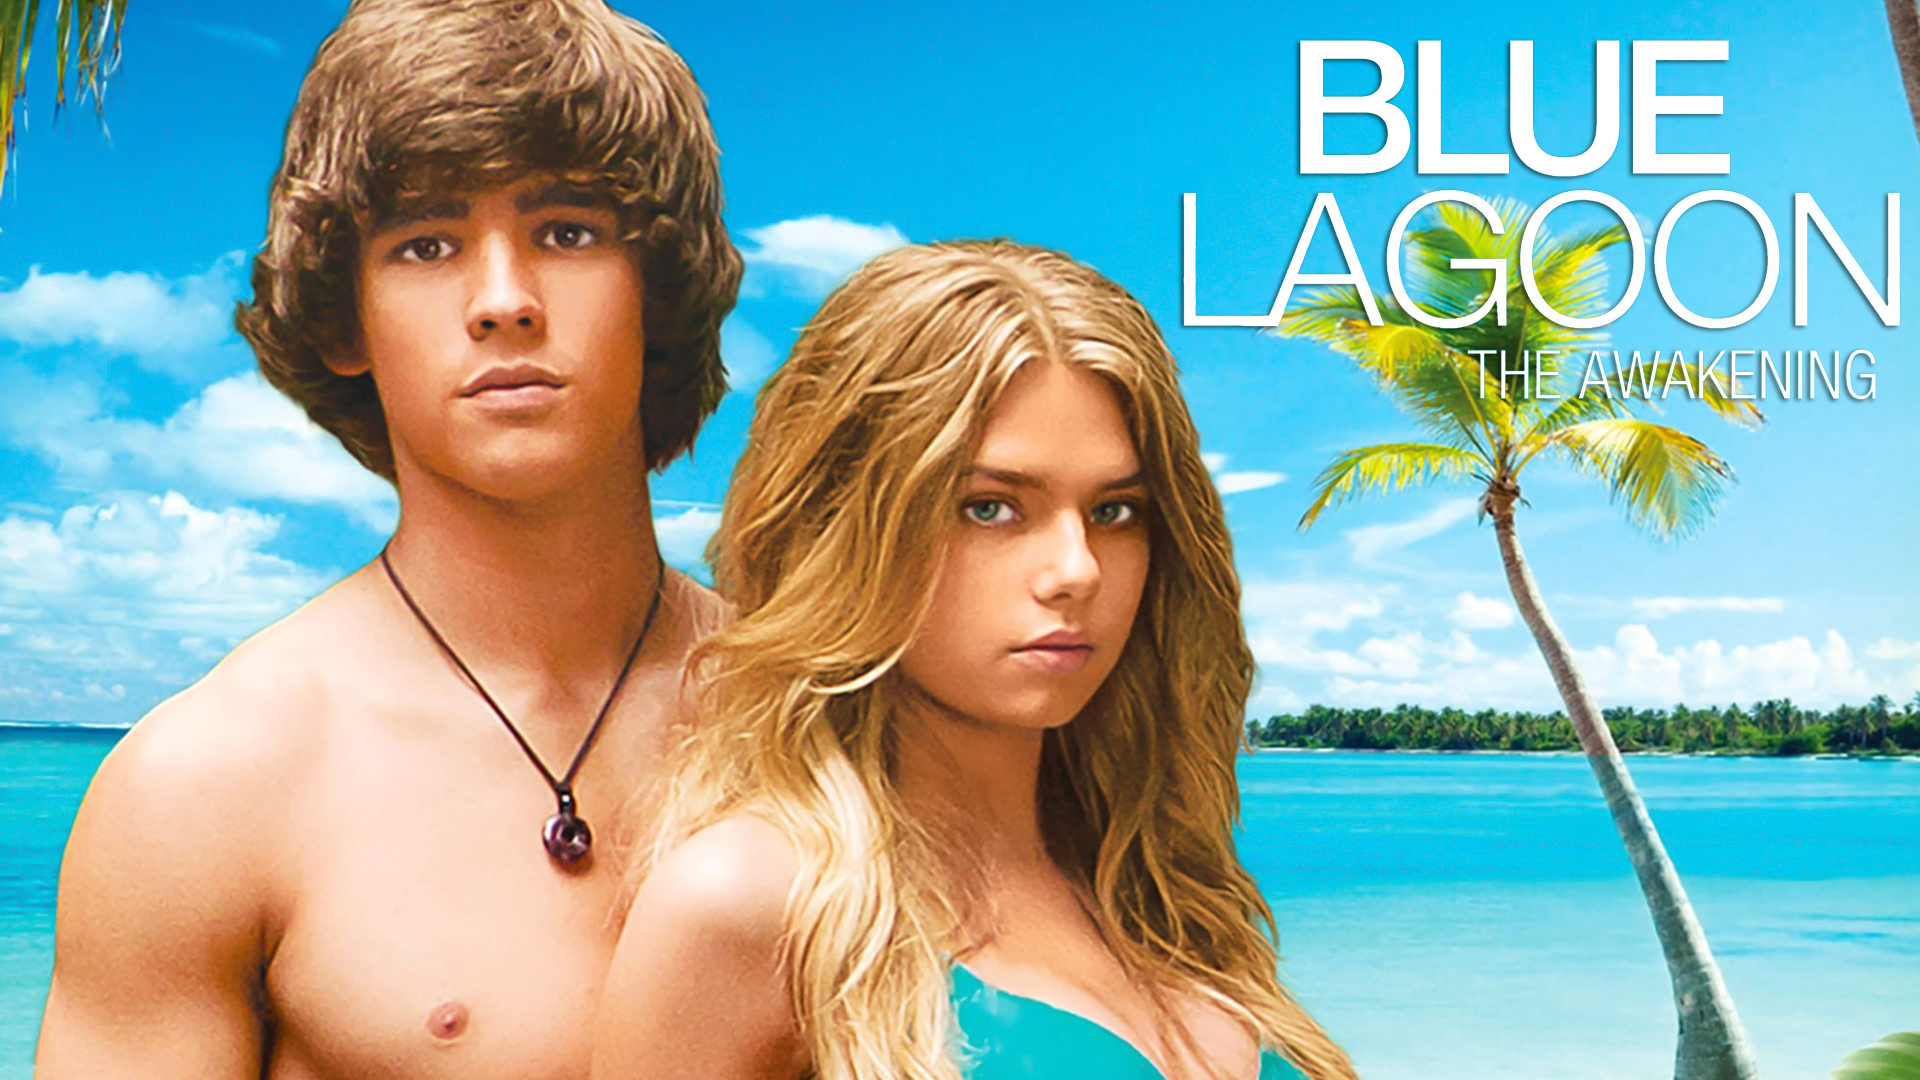 britta benson recommends the blue lagoon full movie download pic